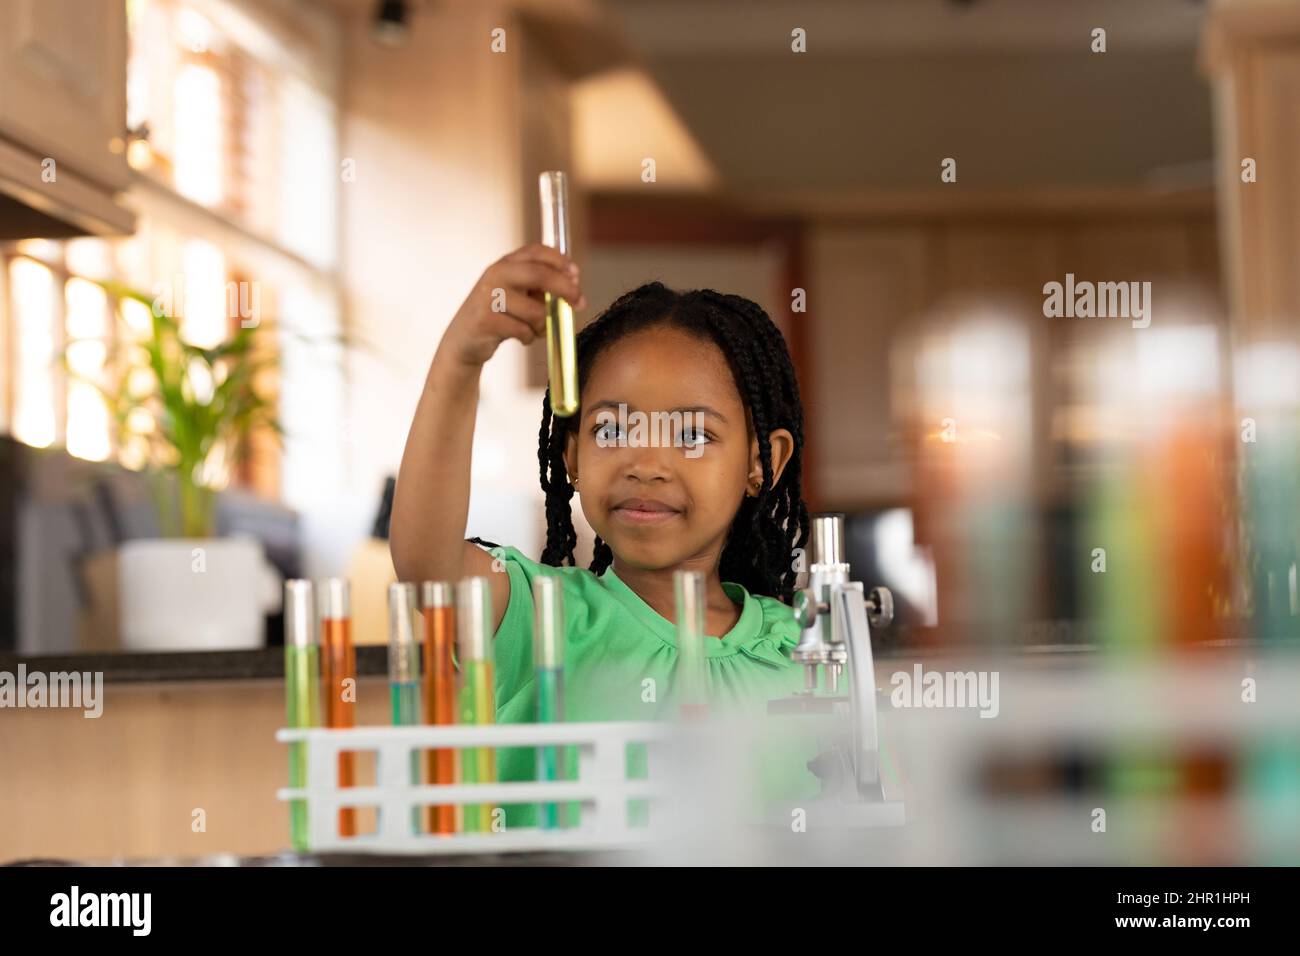 Cute innocent african american girl examining solution in test tube at home Stock Photo